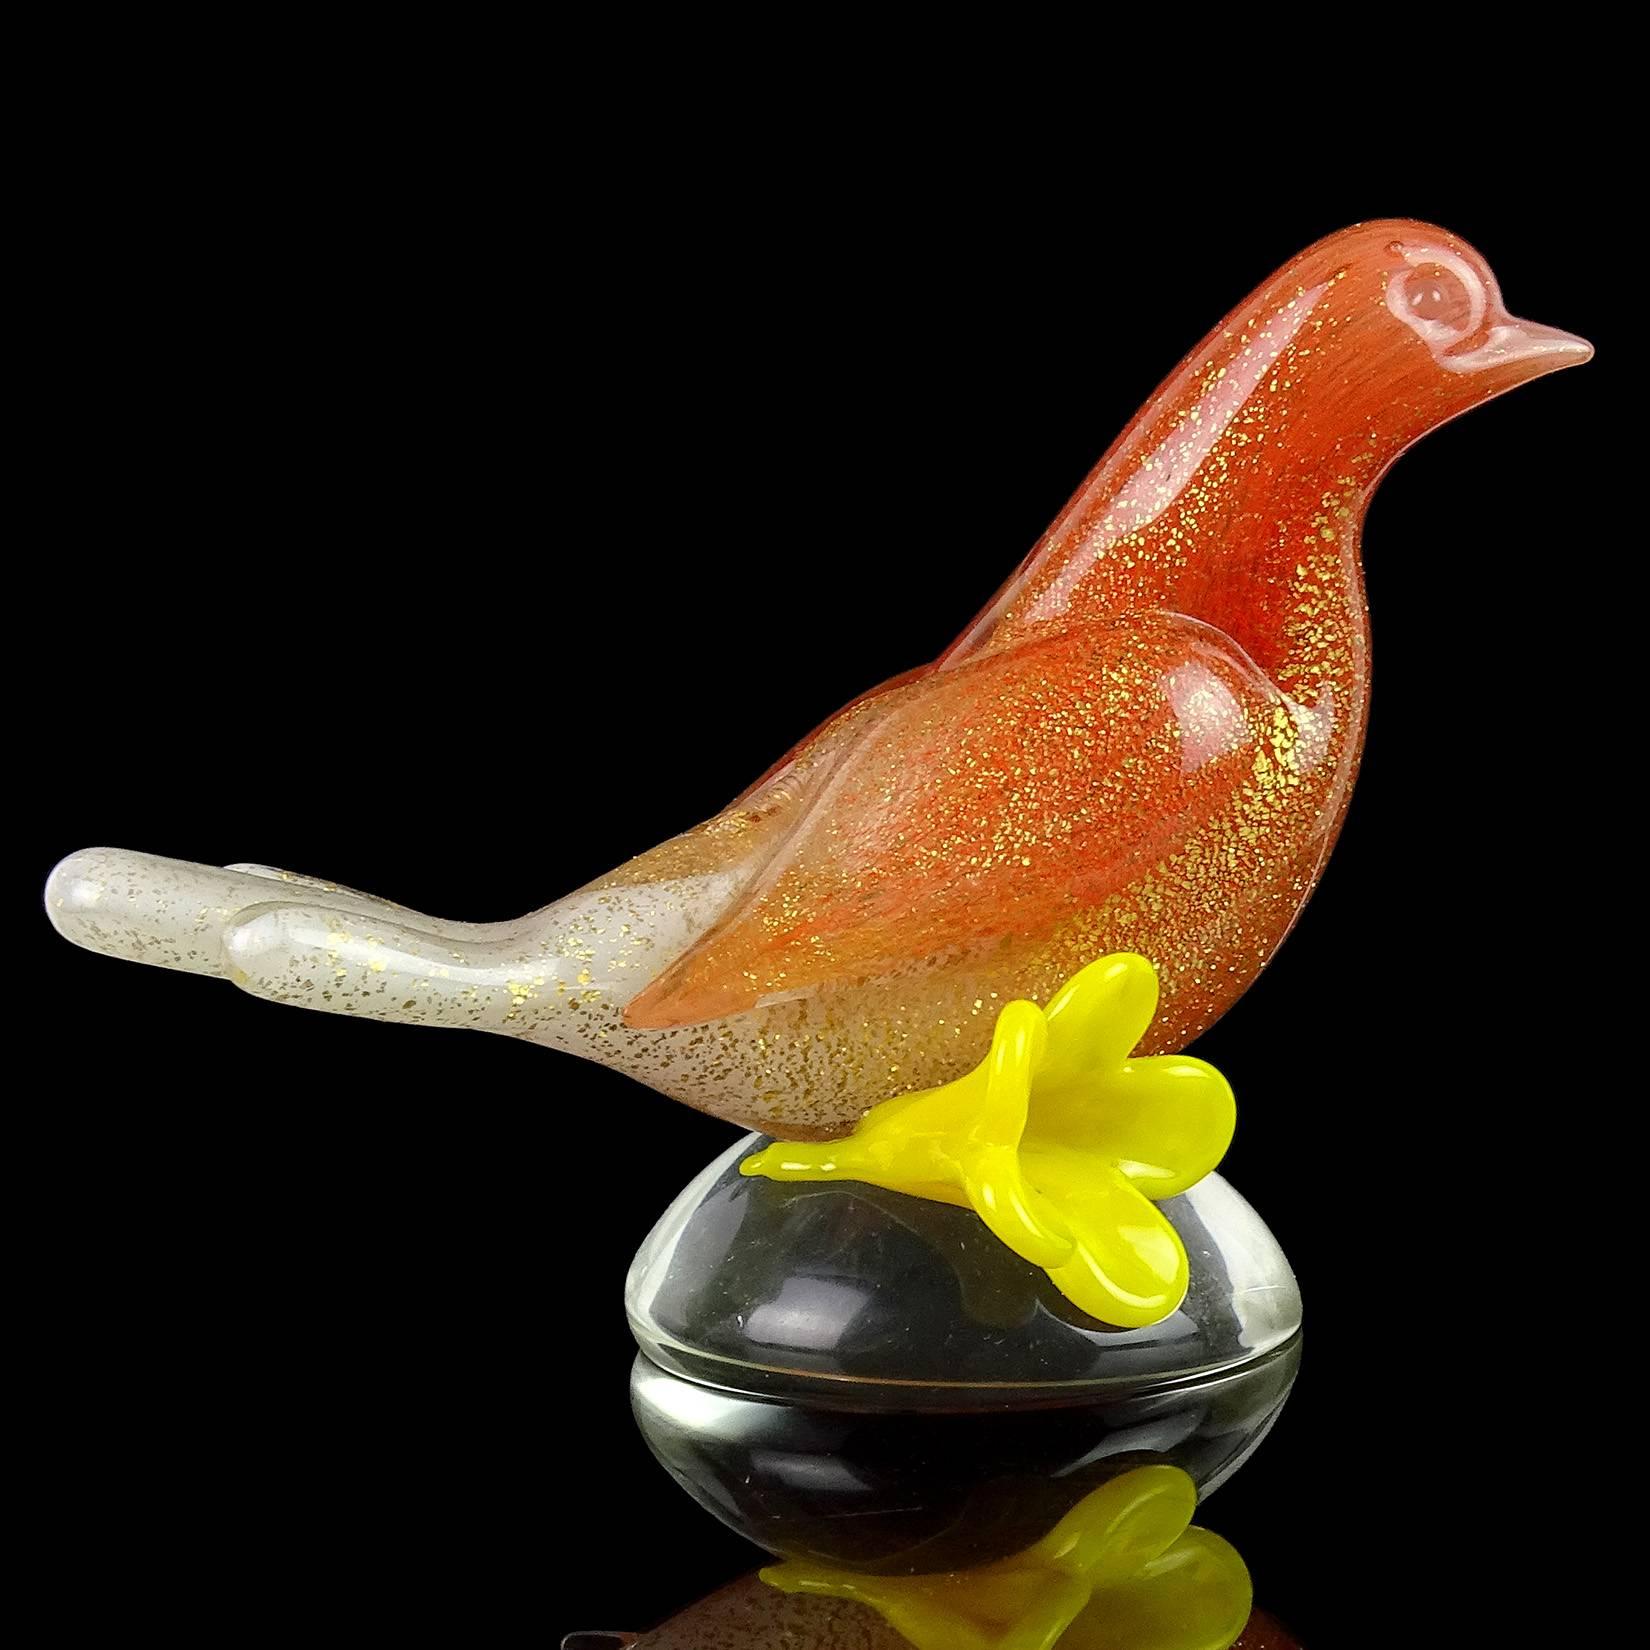 Beautiful vintage Murano hand blown orange, white and gold flecks Italian art glass bird with flower sculpture / paperweight. Documented to designer Archimede Seguso. The piece is profusely covered in gold leaf, with an “ombre” fade from orange to